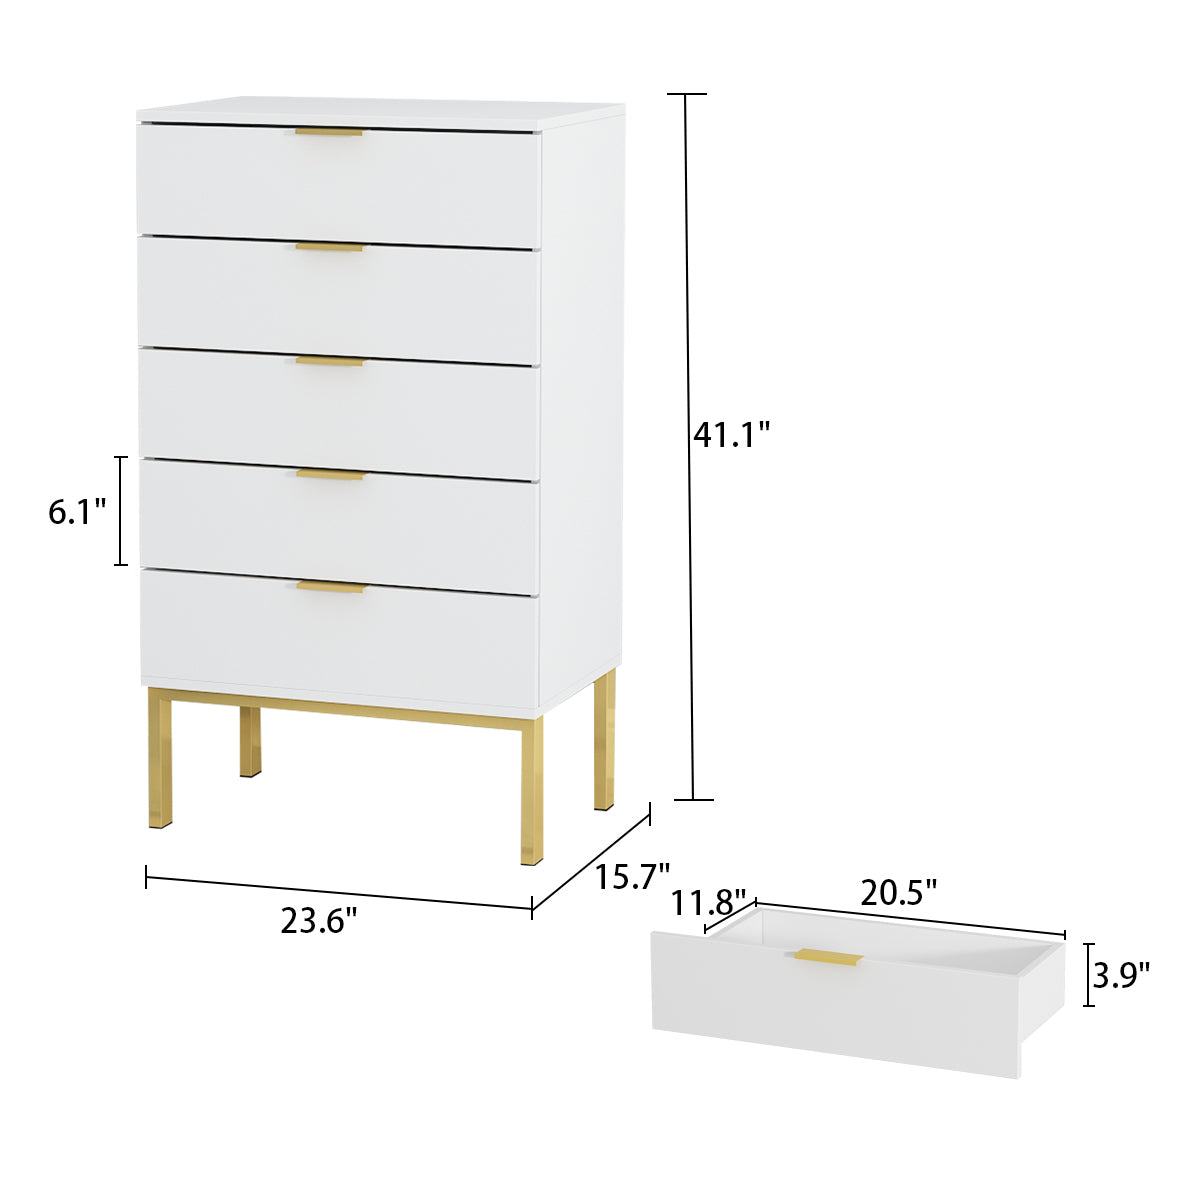 5-Drawer Dresser Chest Storage Cabinet Organizer Unit with Metal Legs for Bedroom Living Room Entryway Hallway